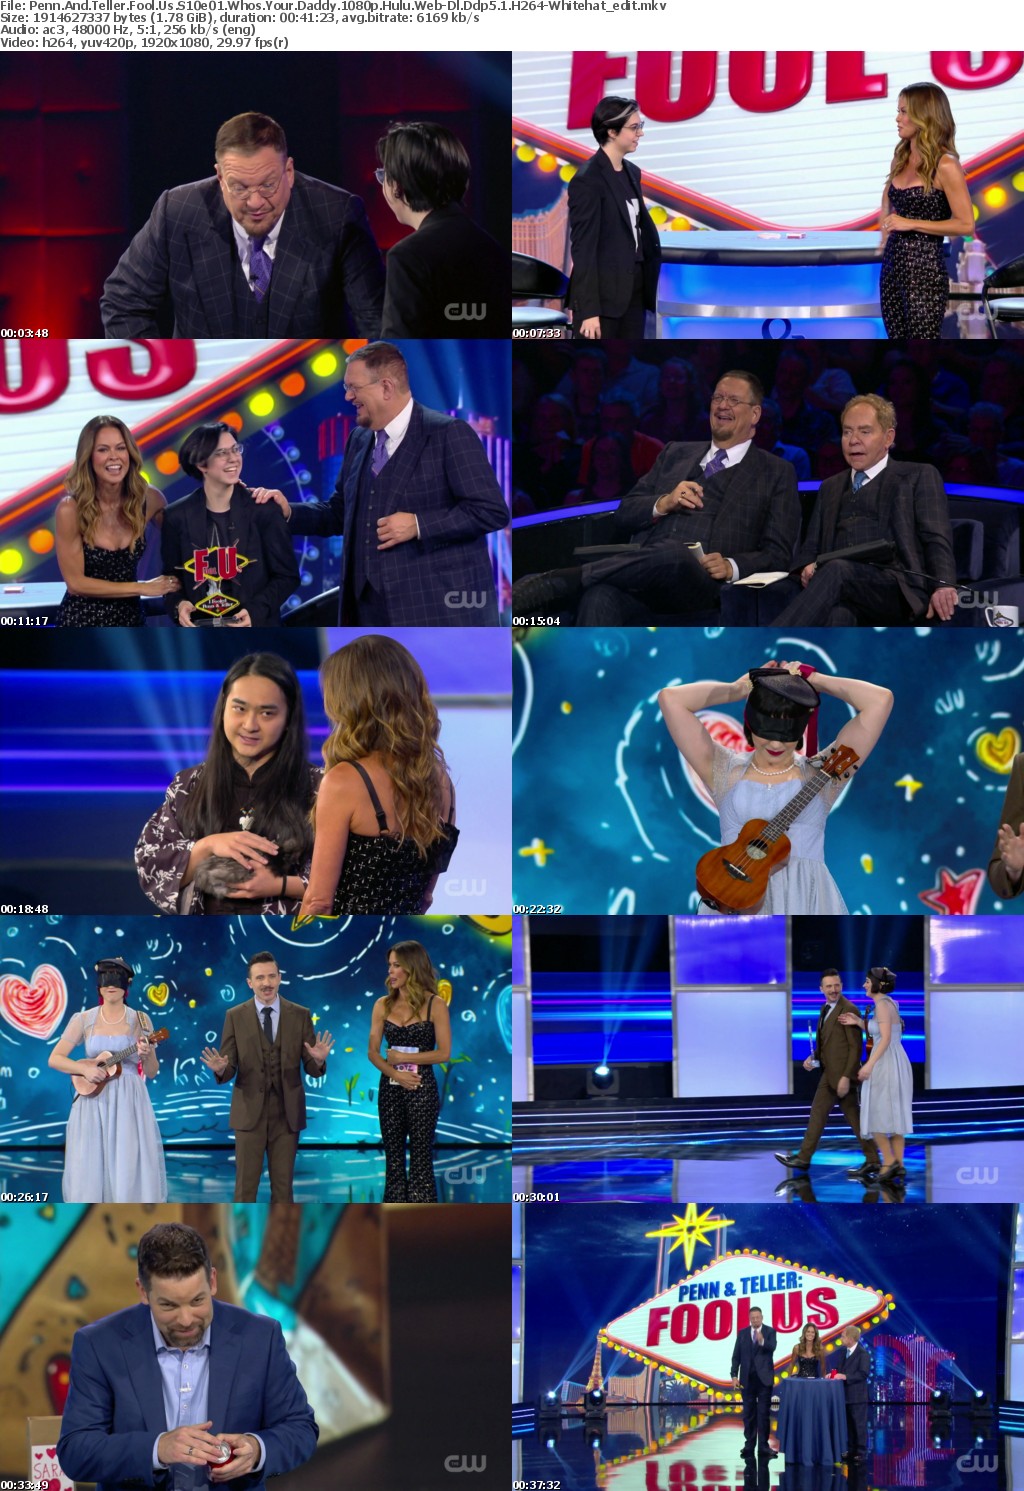 Penn And Teller Fool Us S10e01 Whos Your Daddy 1080p Hulu Web-Dl Ddp5 1 H264-Whitehat edit